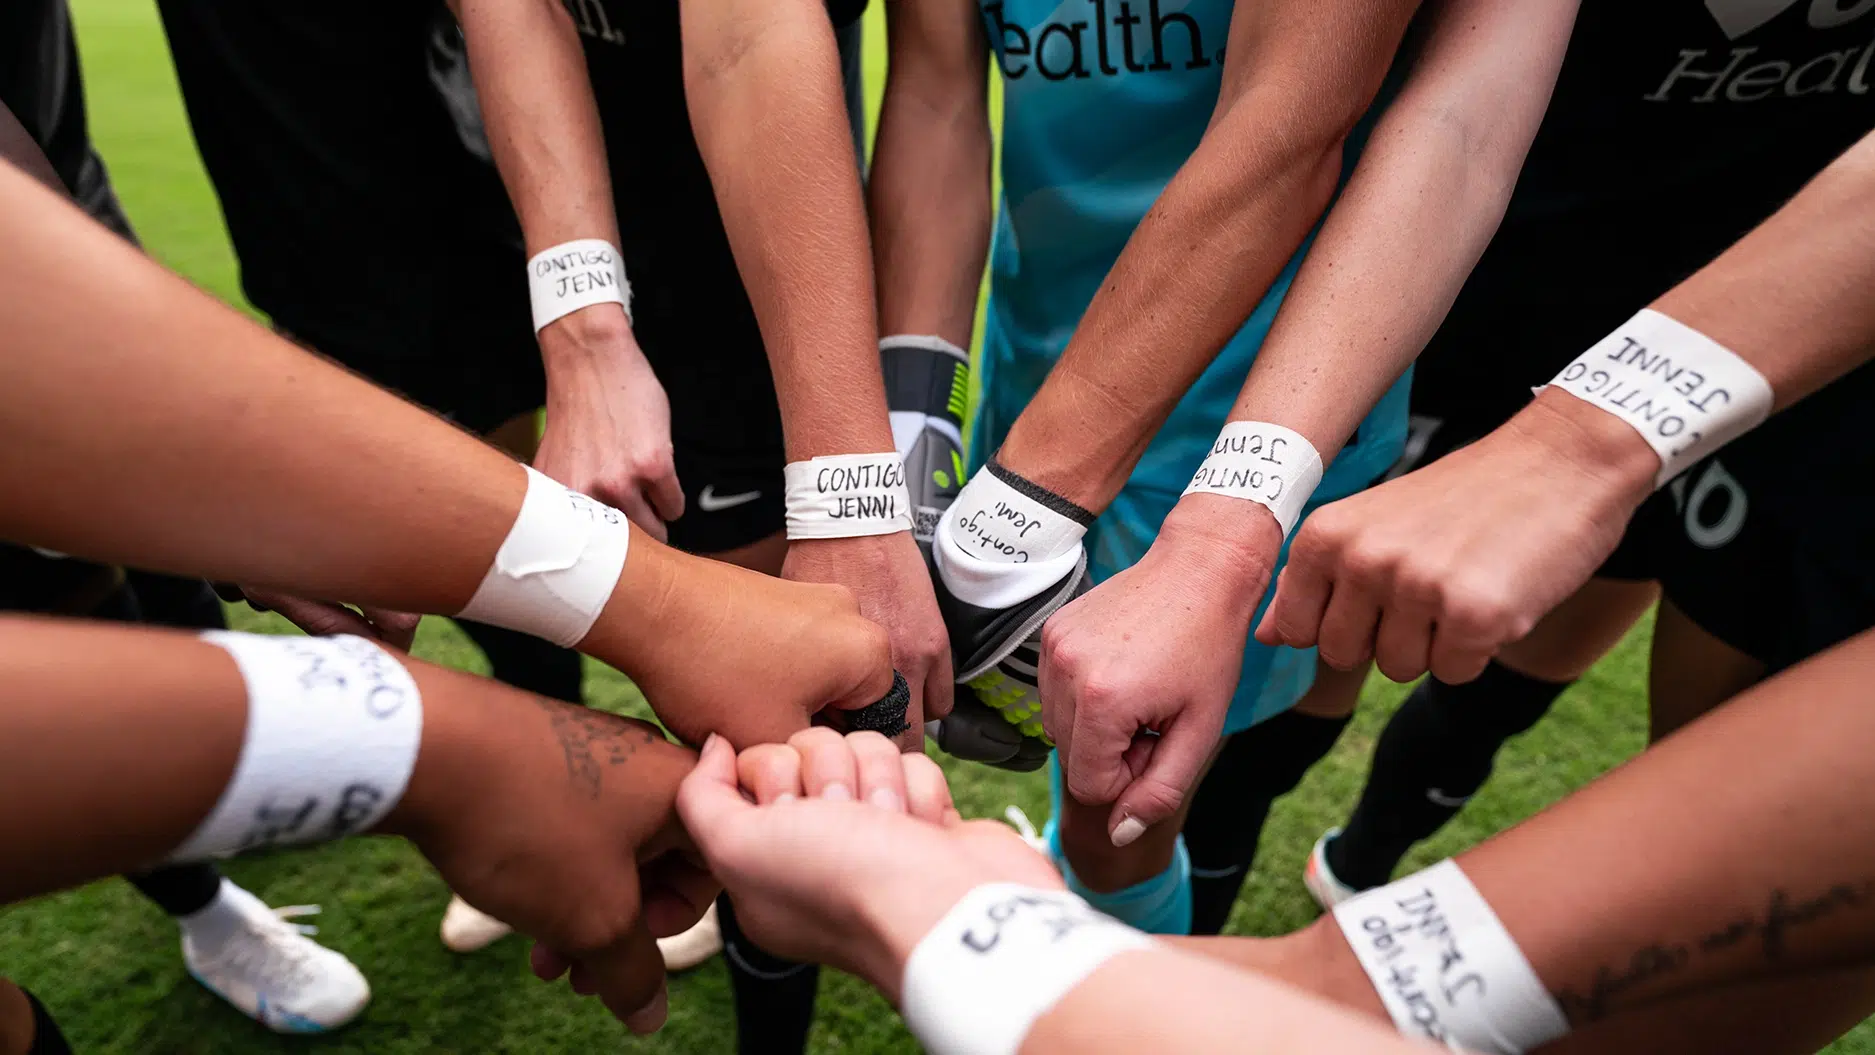 A group of players put their fists together showing their wrists all have white athletic tape around them with the words 